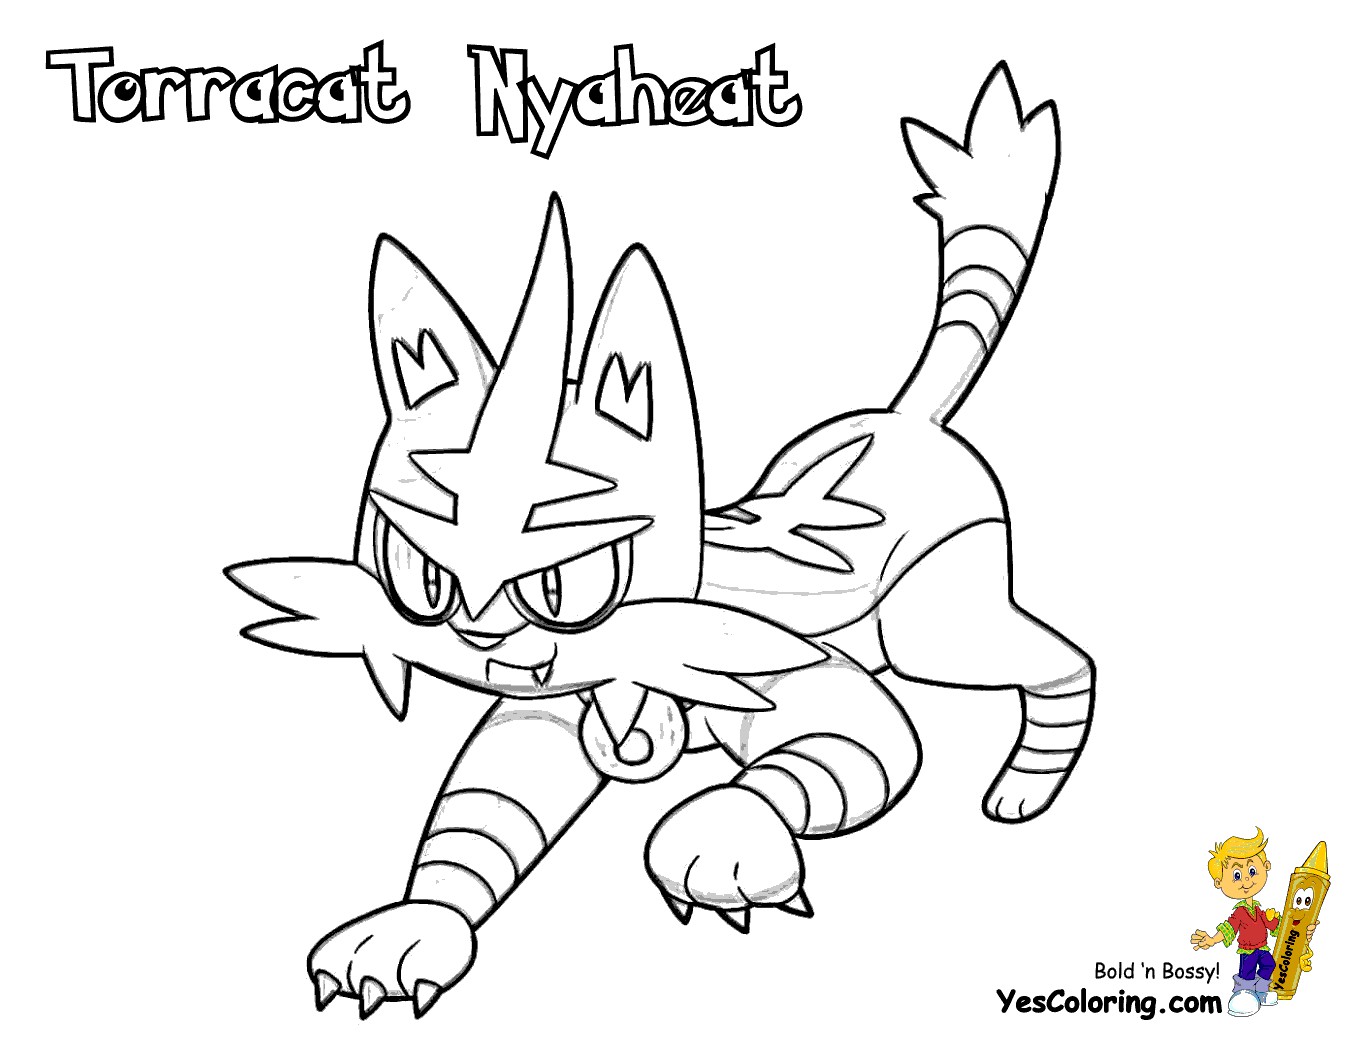 Pokemon torracat Coloring Pages